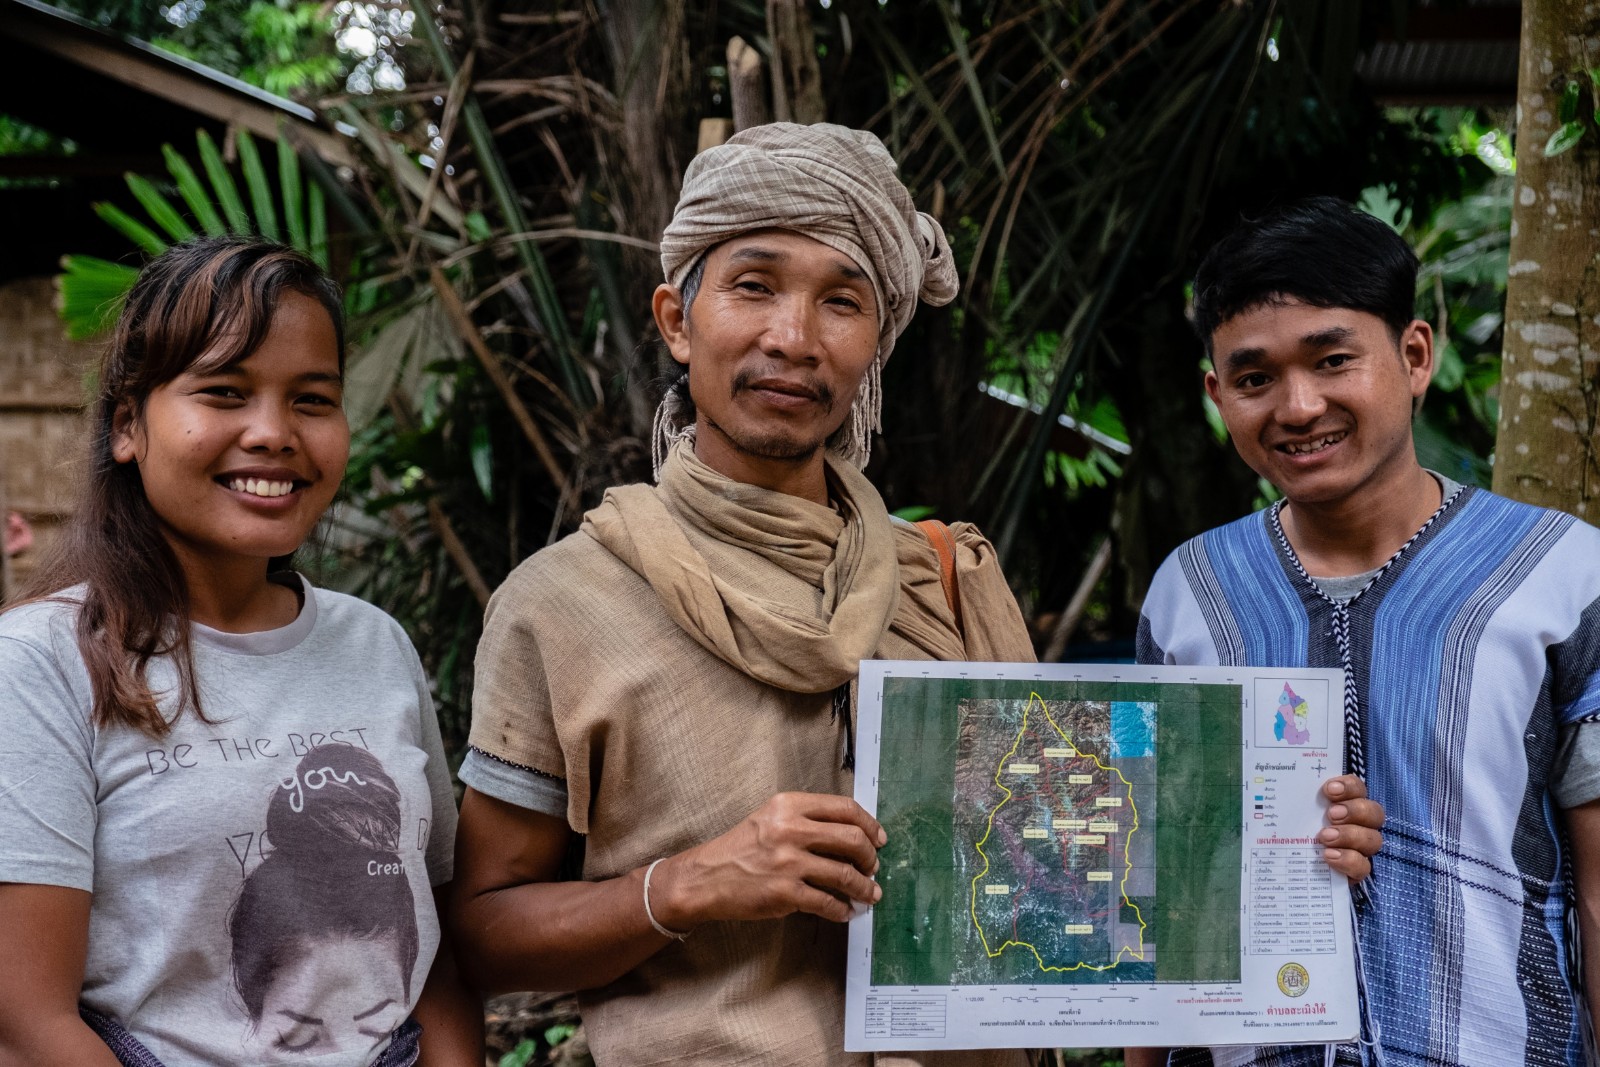 Prue Odochao and other indigenous activists across Thailand maintain that their low-impact lifestyles are a part of a solution for climate change mitigation, not a problem.